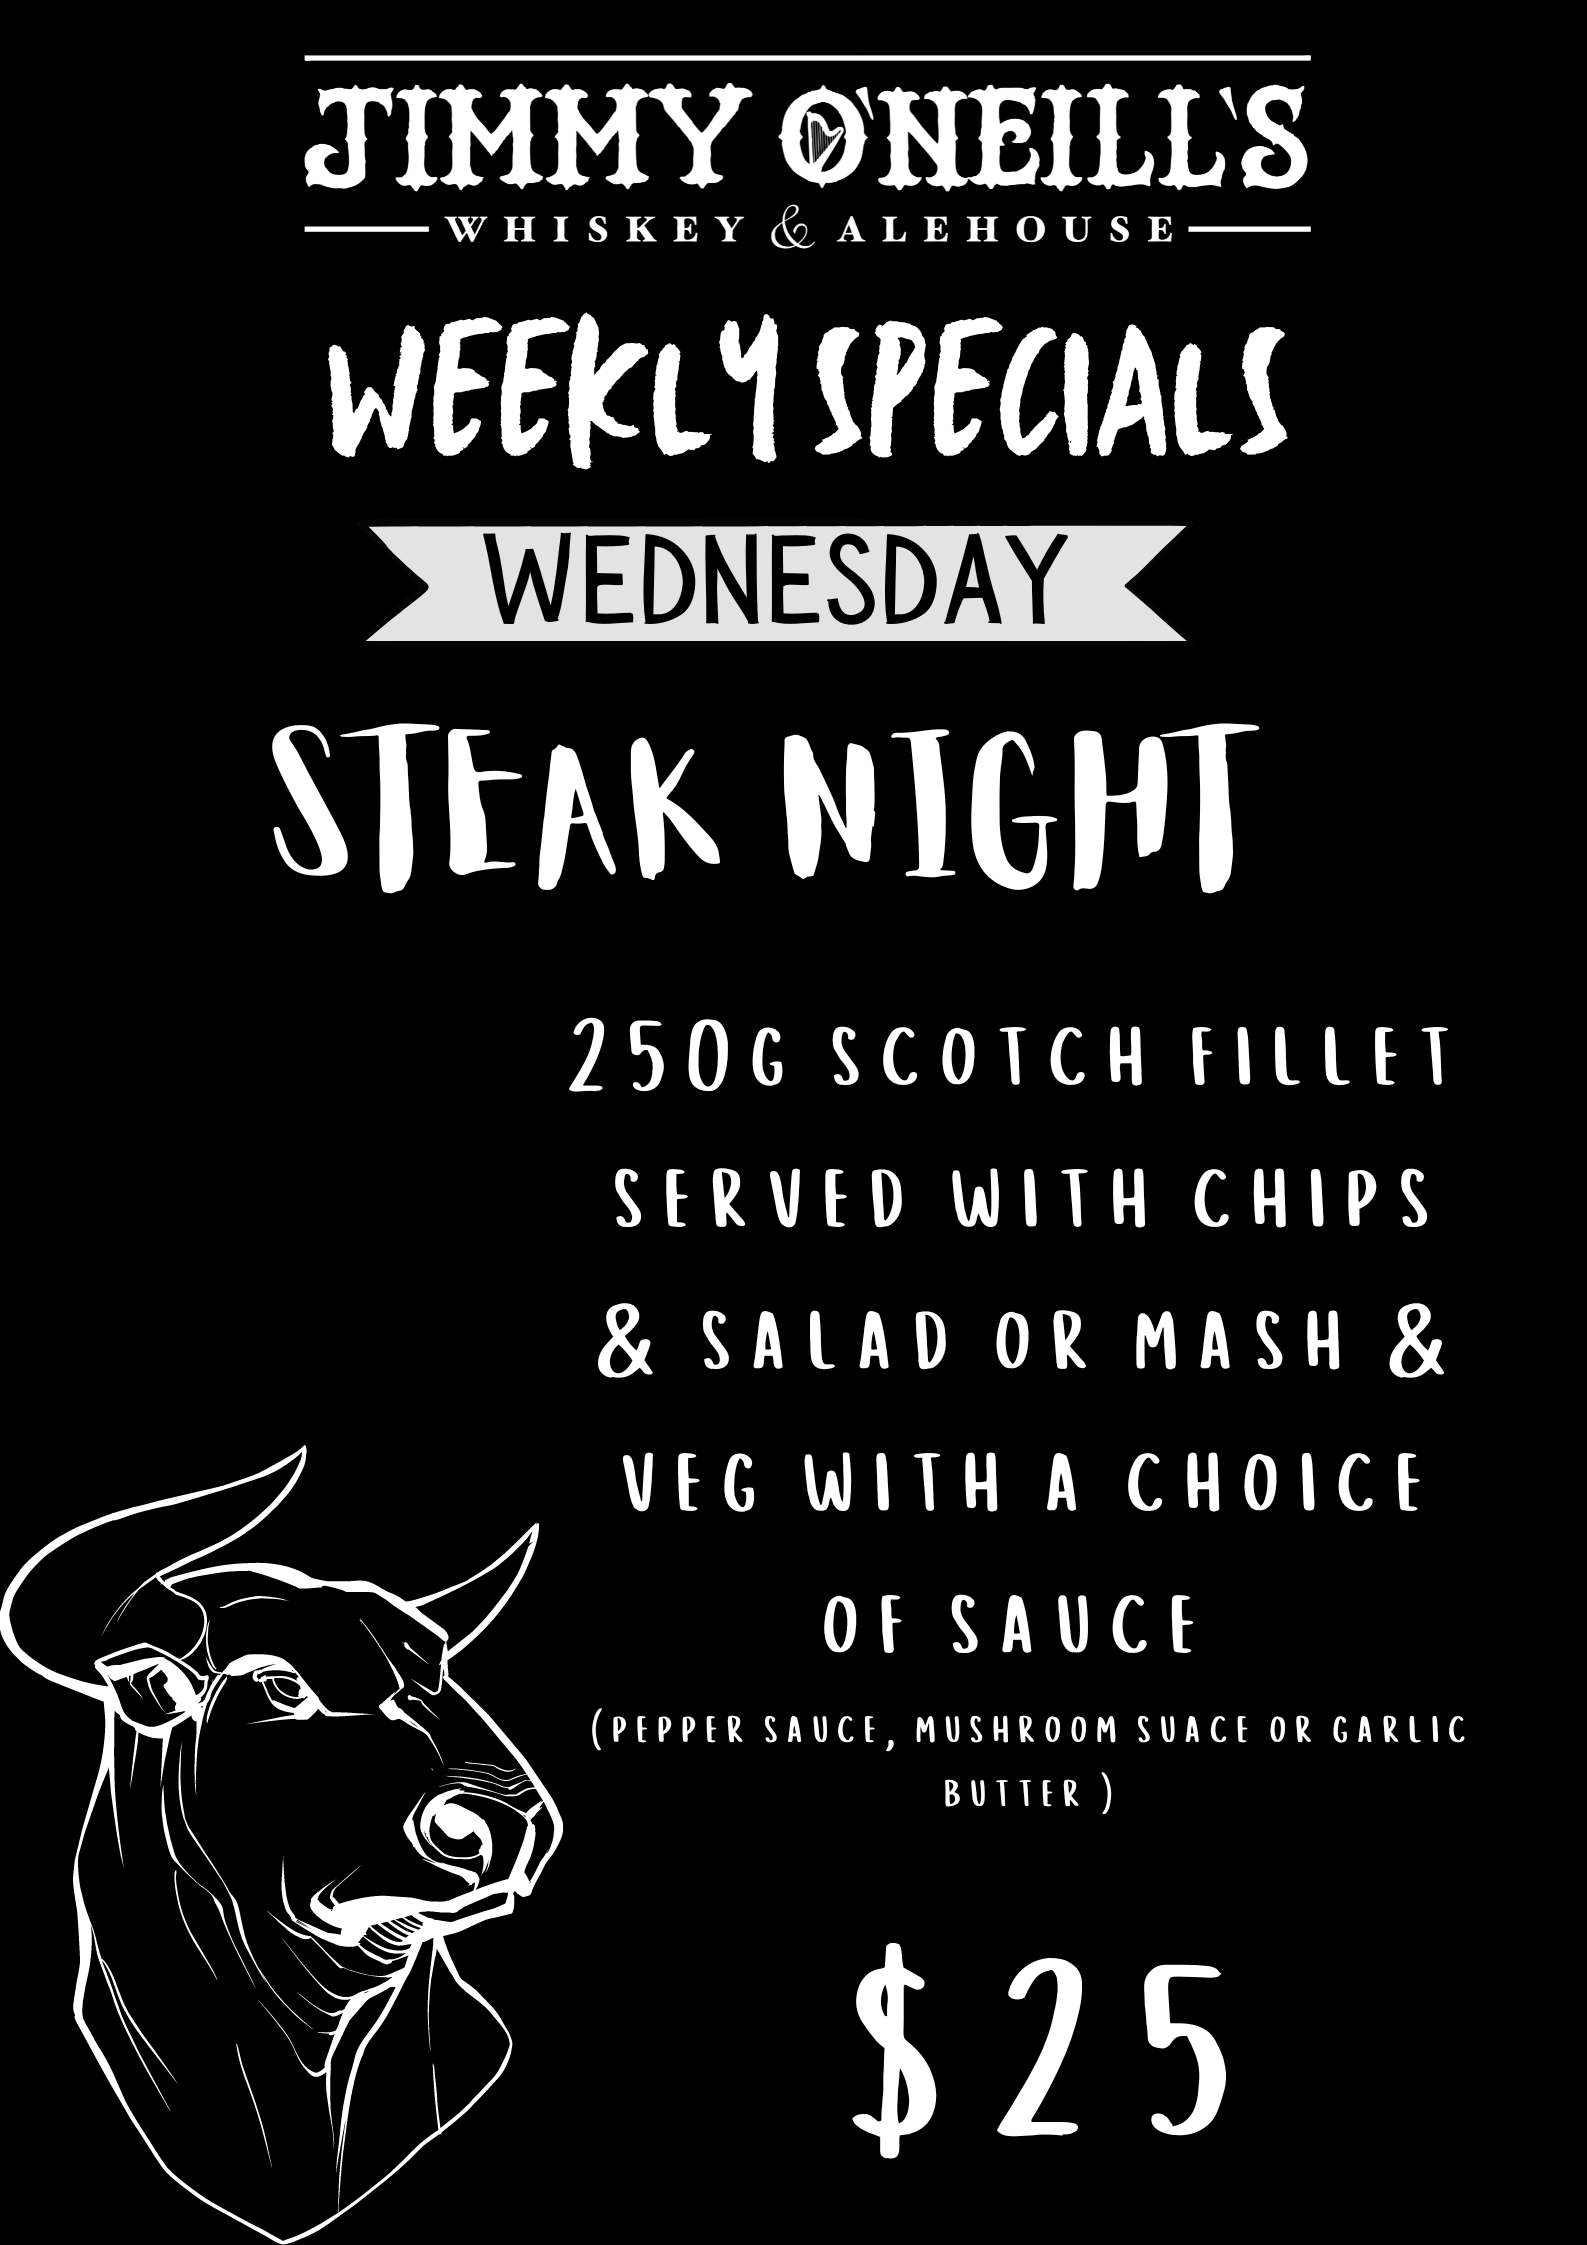 WEEKLY SPECIALS FOR JIMMY'S